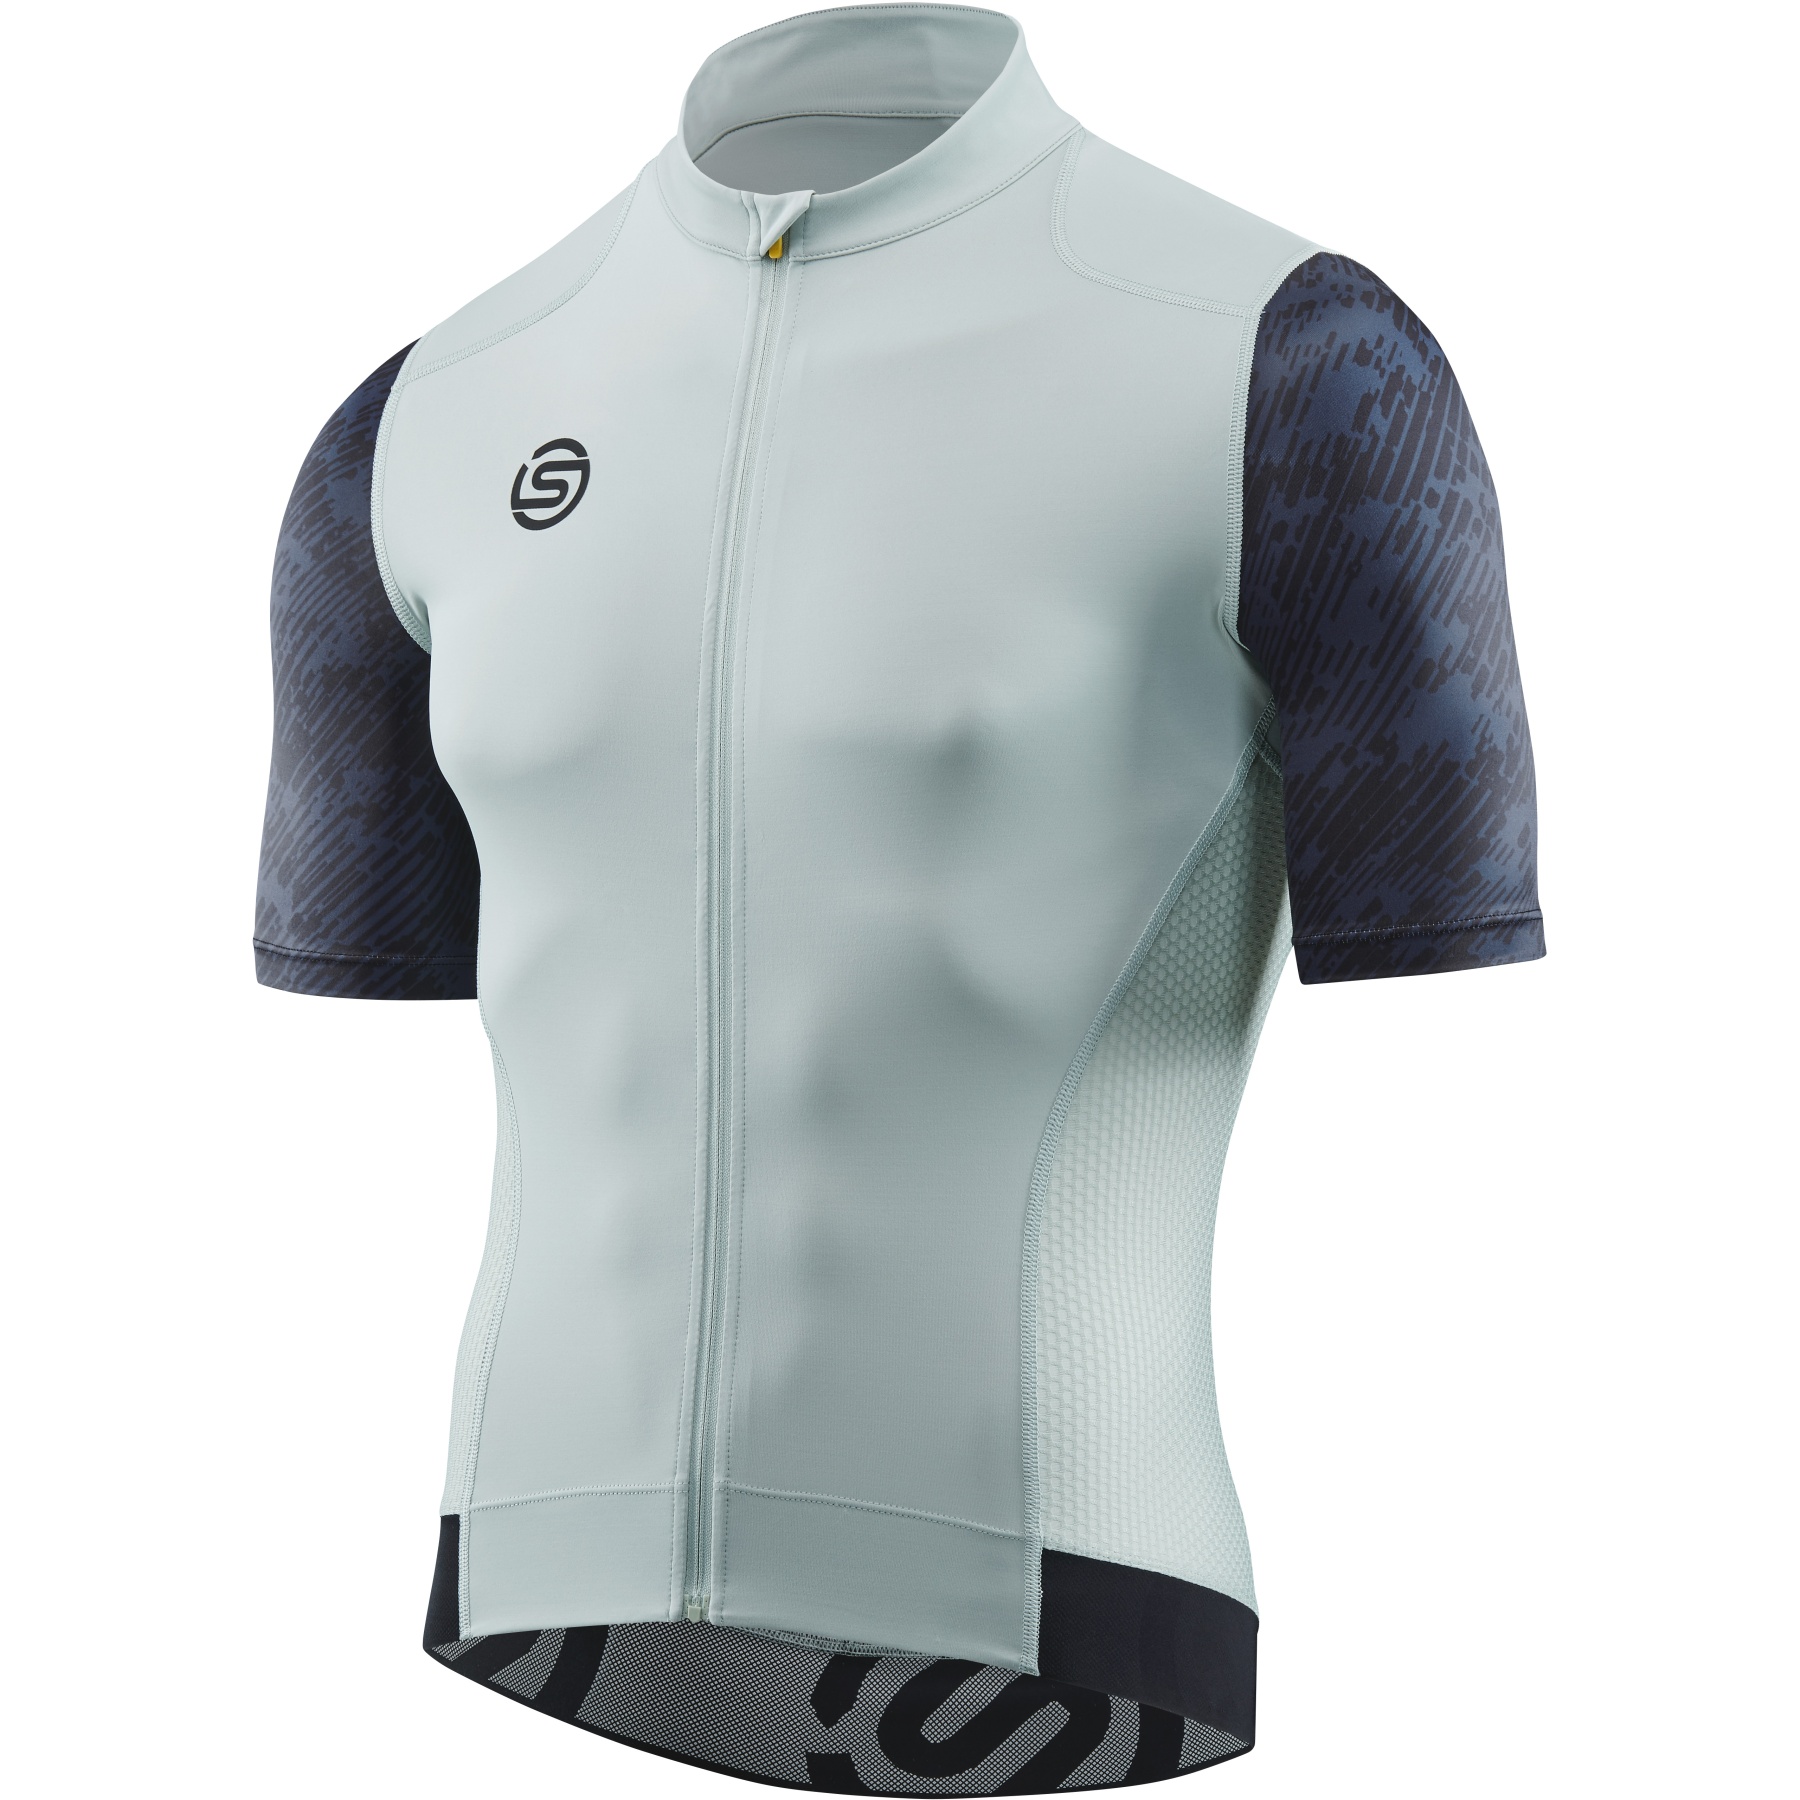 Image of SKINS CYCLE Elite Jersey - Moss/Graphite